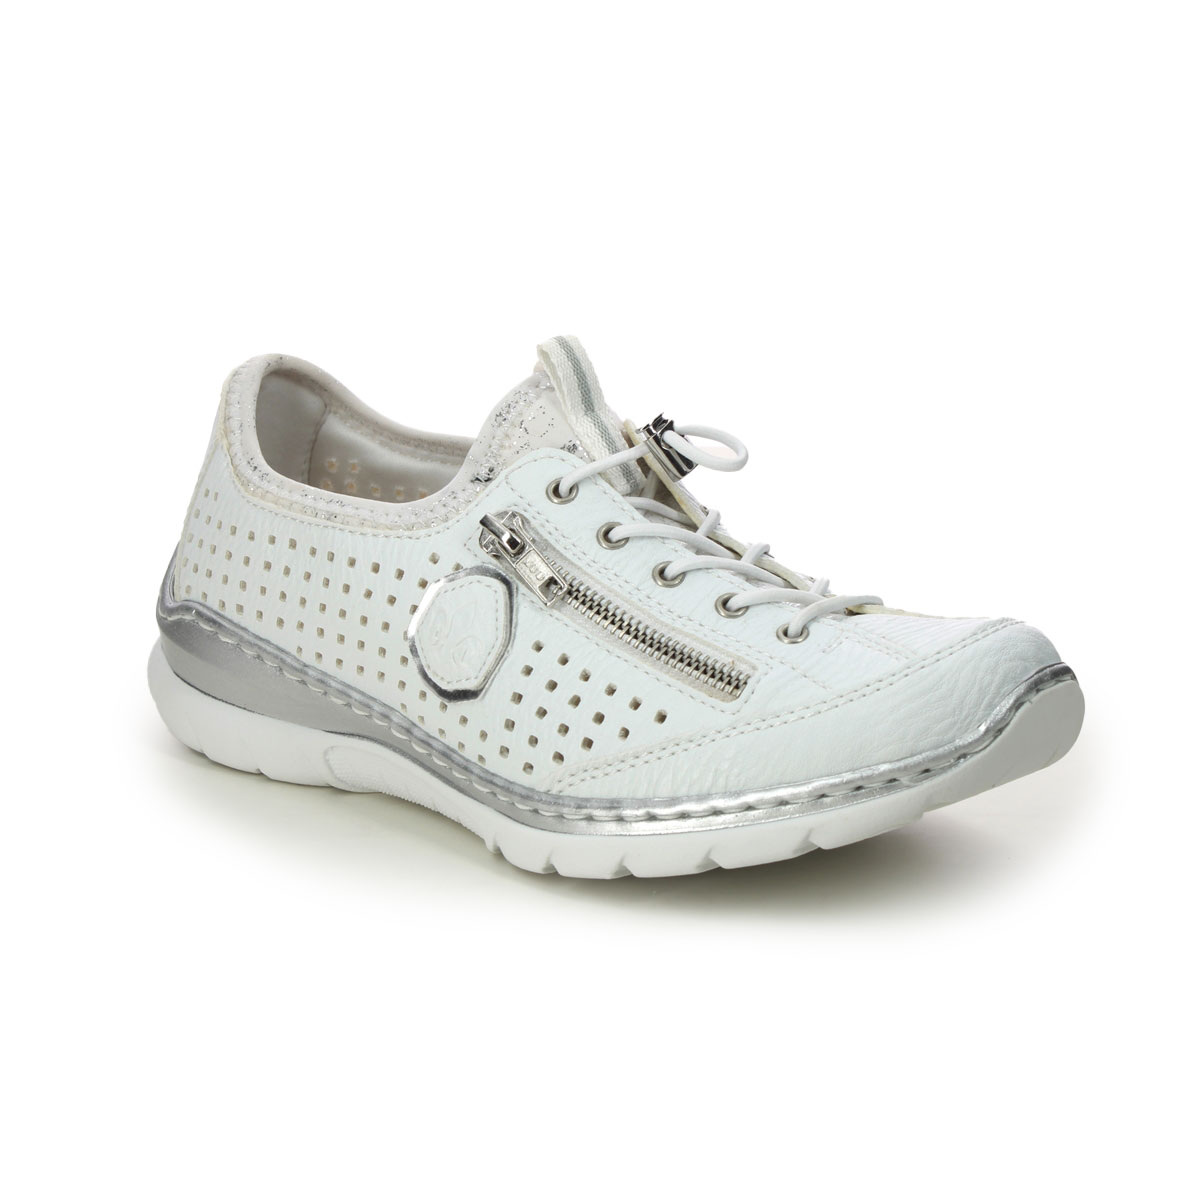 Rieker L3296-82 White Silver Womens lacing shoes in a Plain Man-made in Size 41